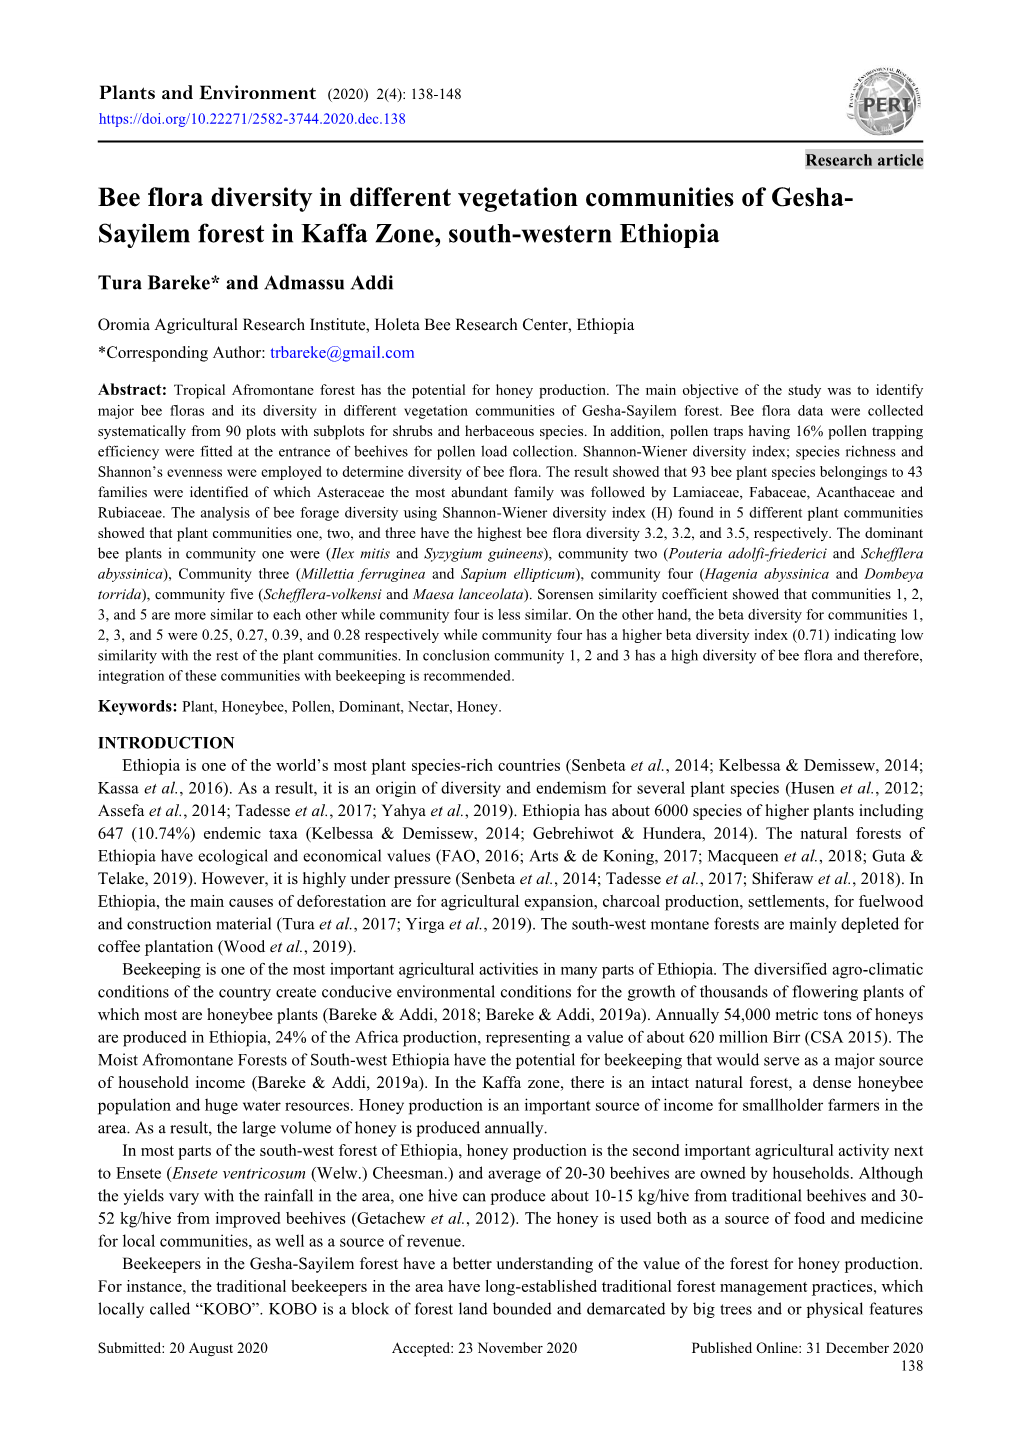 Bee Flora Diversity in Different Vegetation Communities of Gesha- Sayilem Forest in Kaffa Zone, South-Western Ethiopia